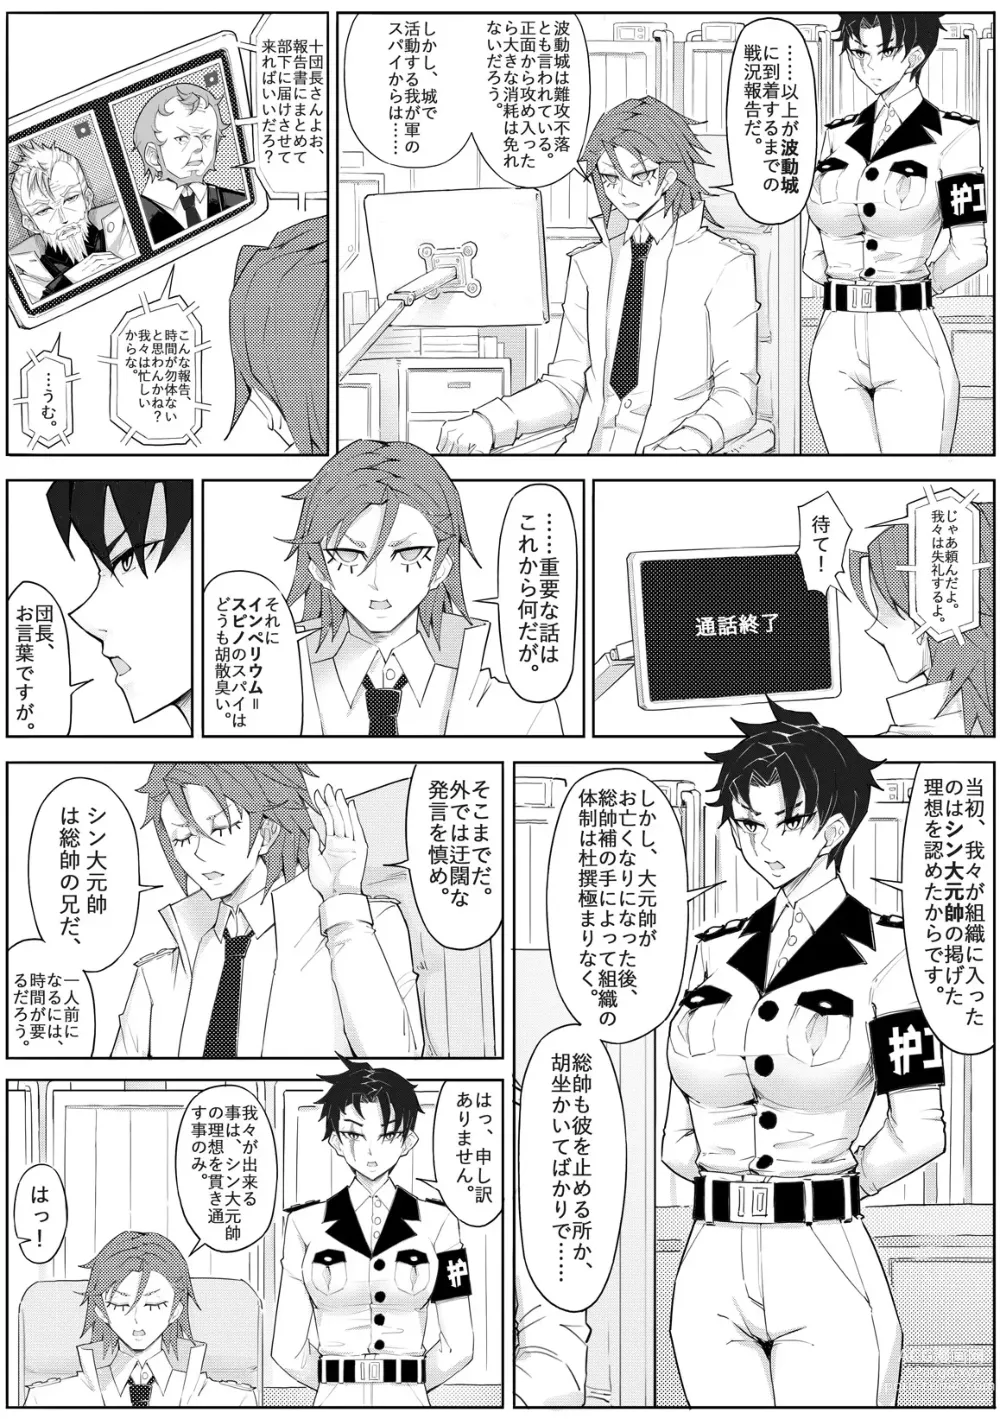 Page 4 of doujinshi Skin Normal Mission 04